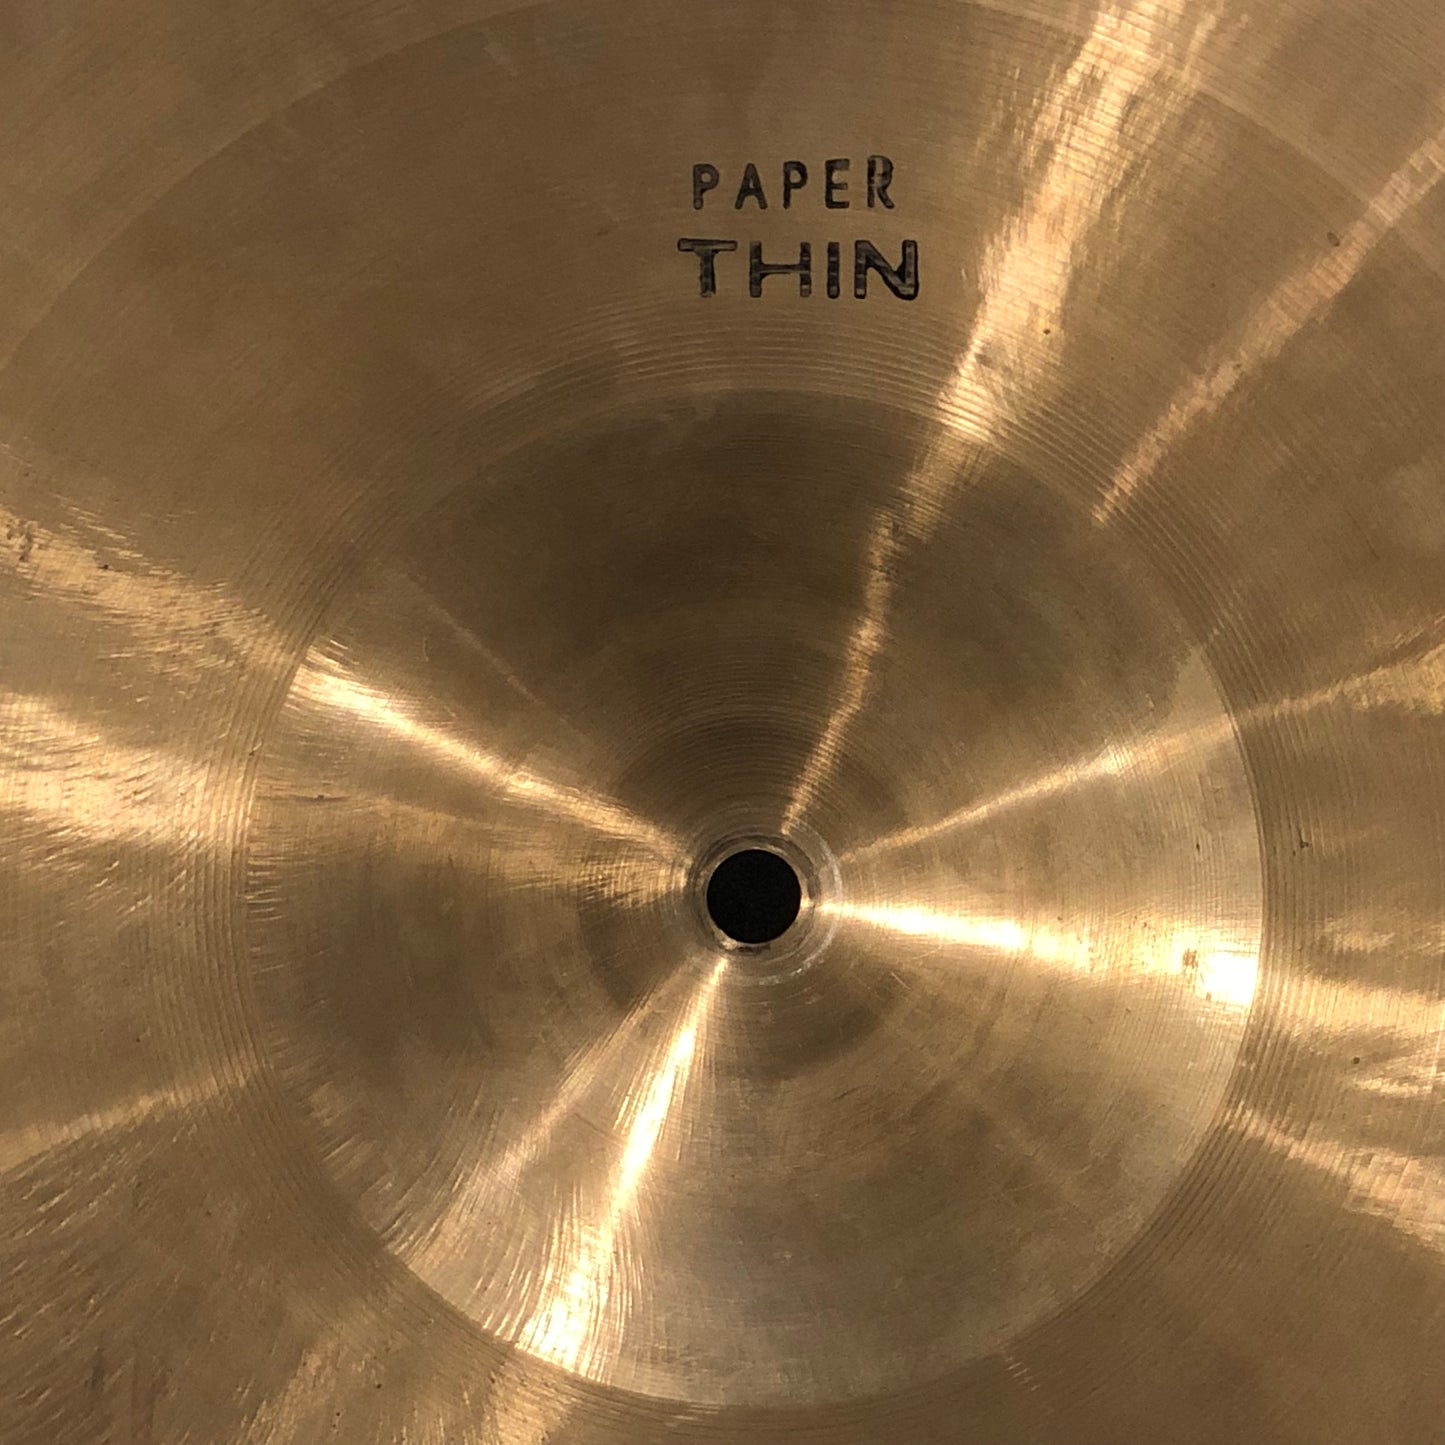 14" Pasha UFIP 1950s/60s Hi-Hat Cymbal Pair Paper Thin Rogers 568g/600g #714